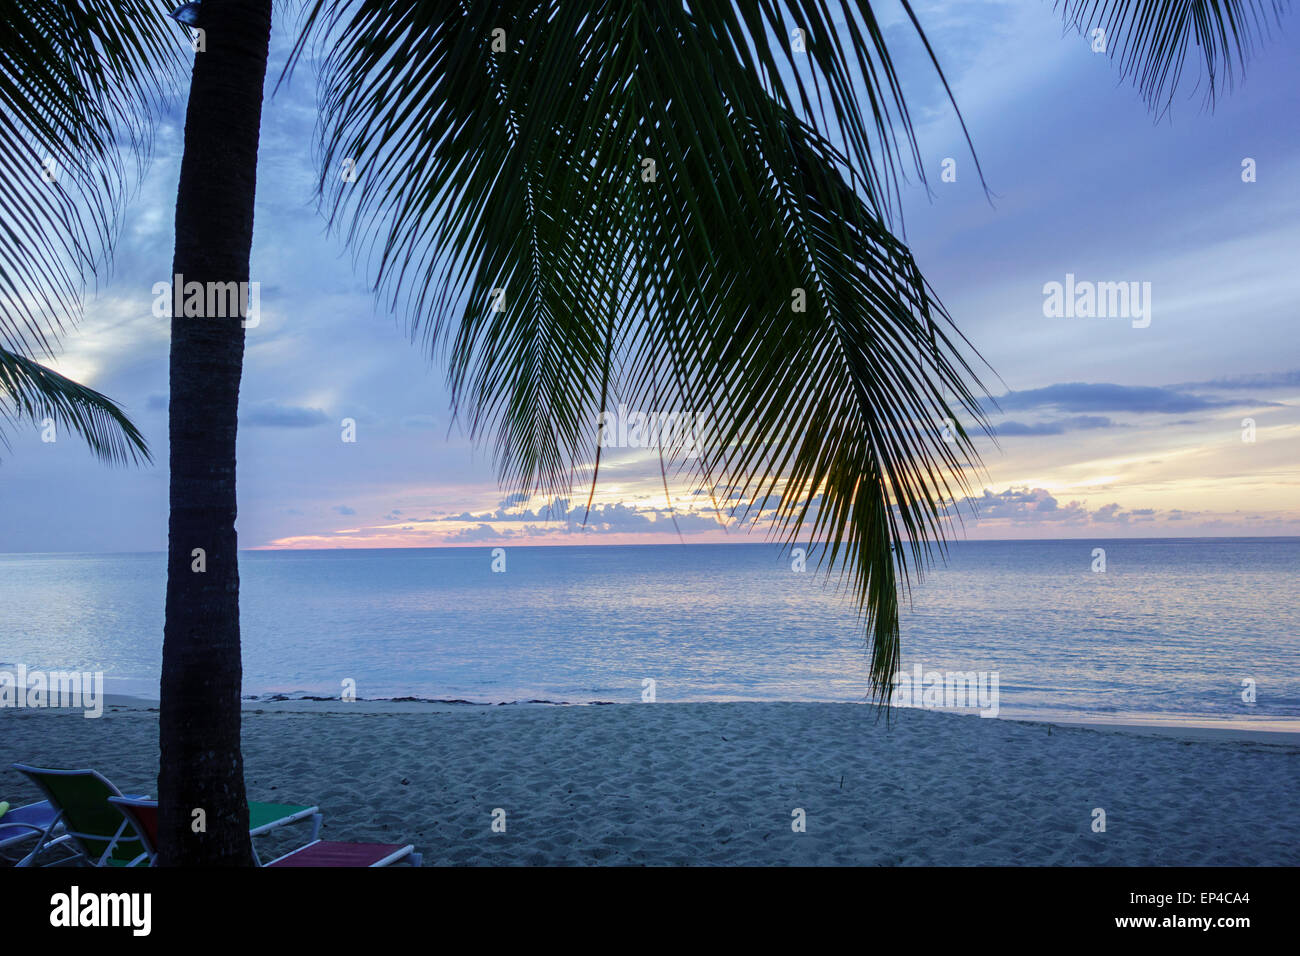 Sandcastle  Beach at dawn, showing the sea and a palm tree.  St. Croix, U.S. Virgin Islands. Stock Photo